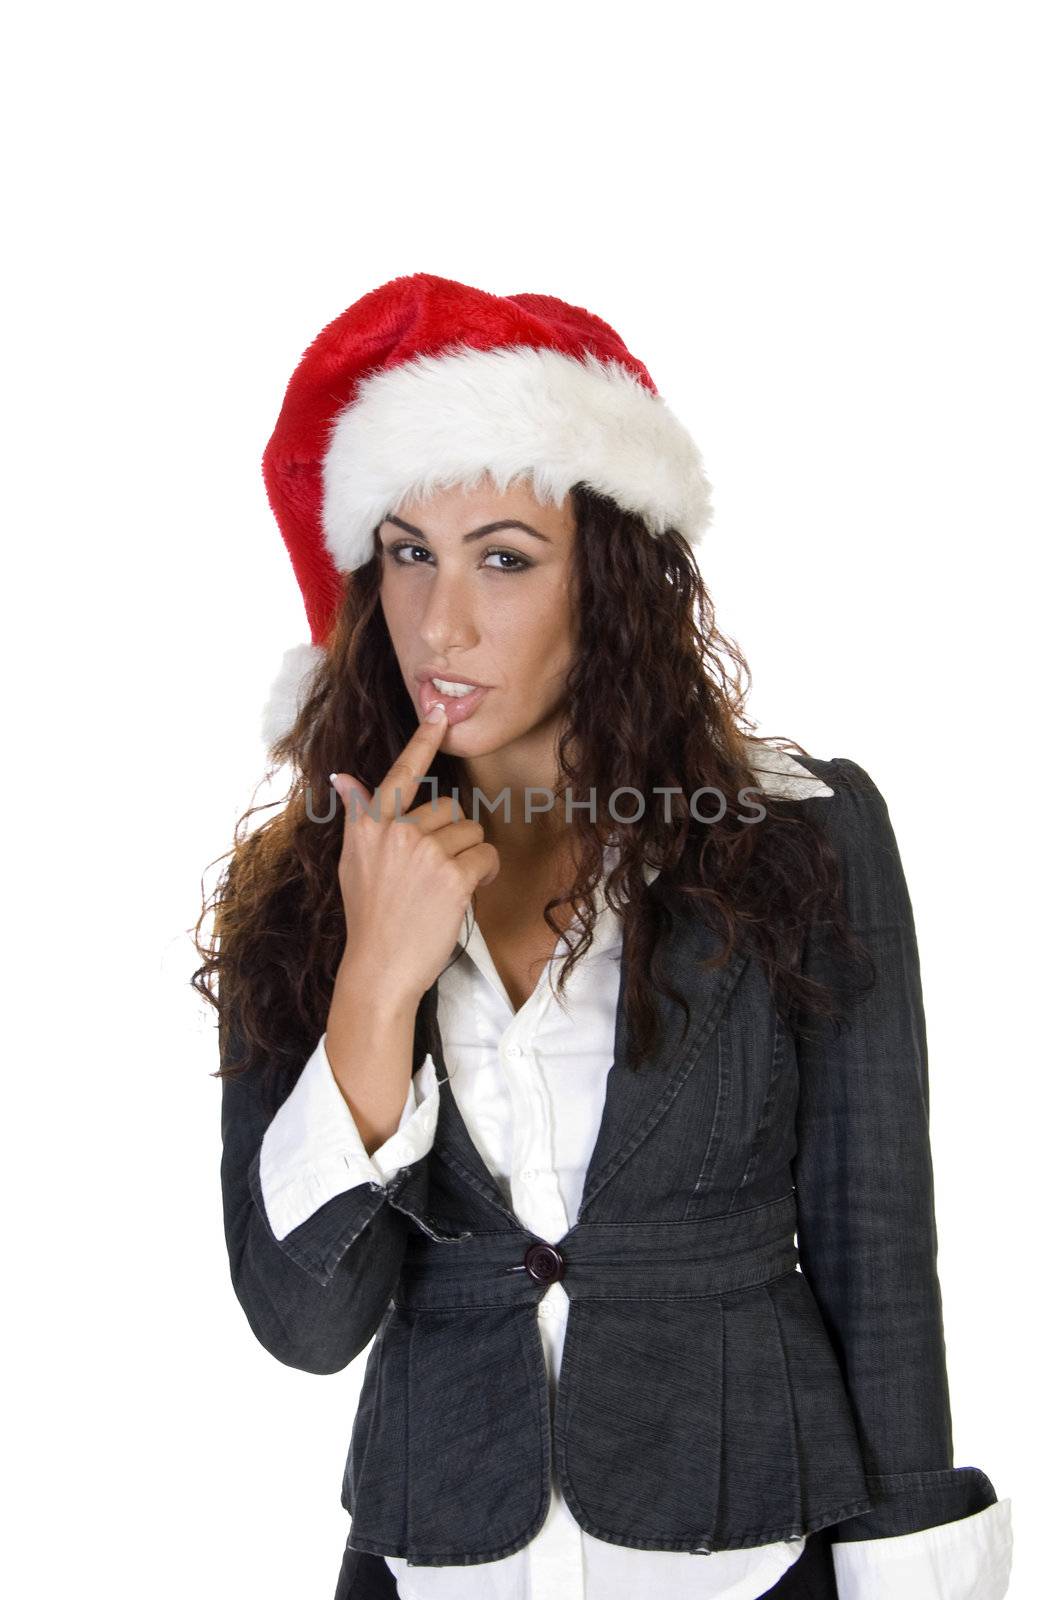 lady touching her lips on an isolated background